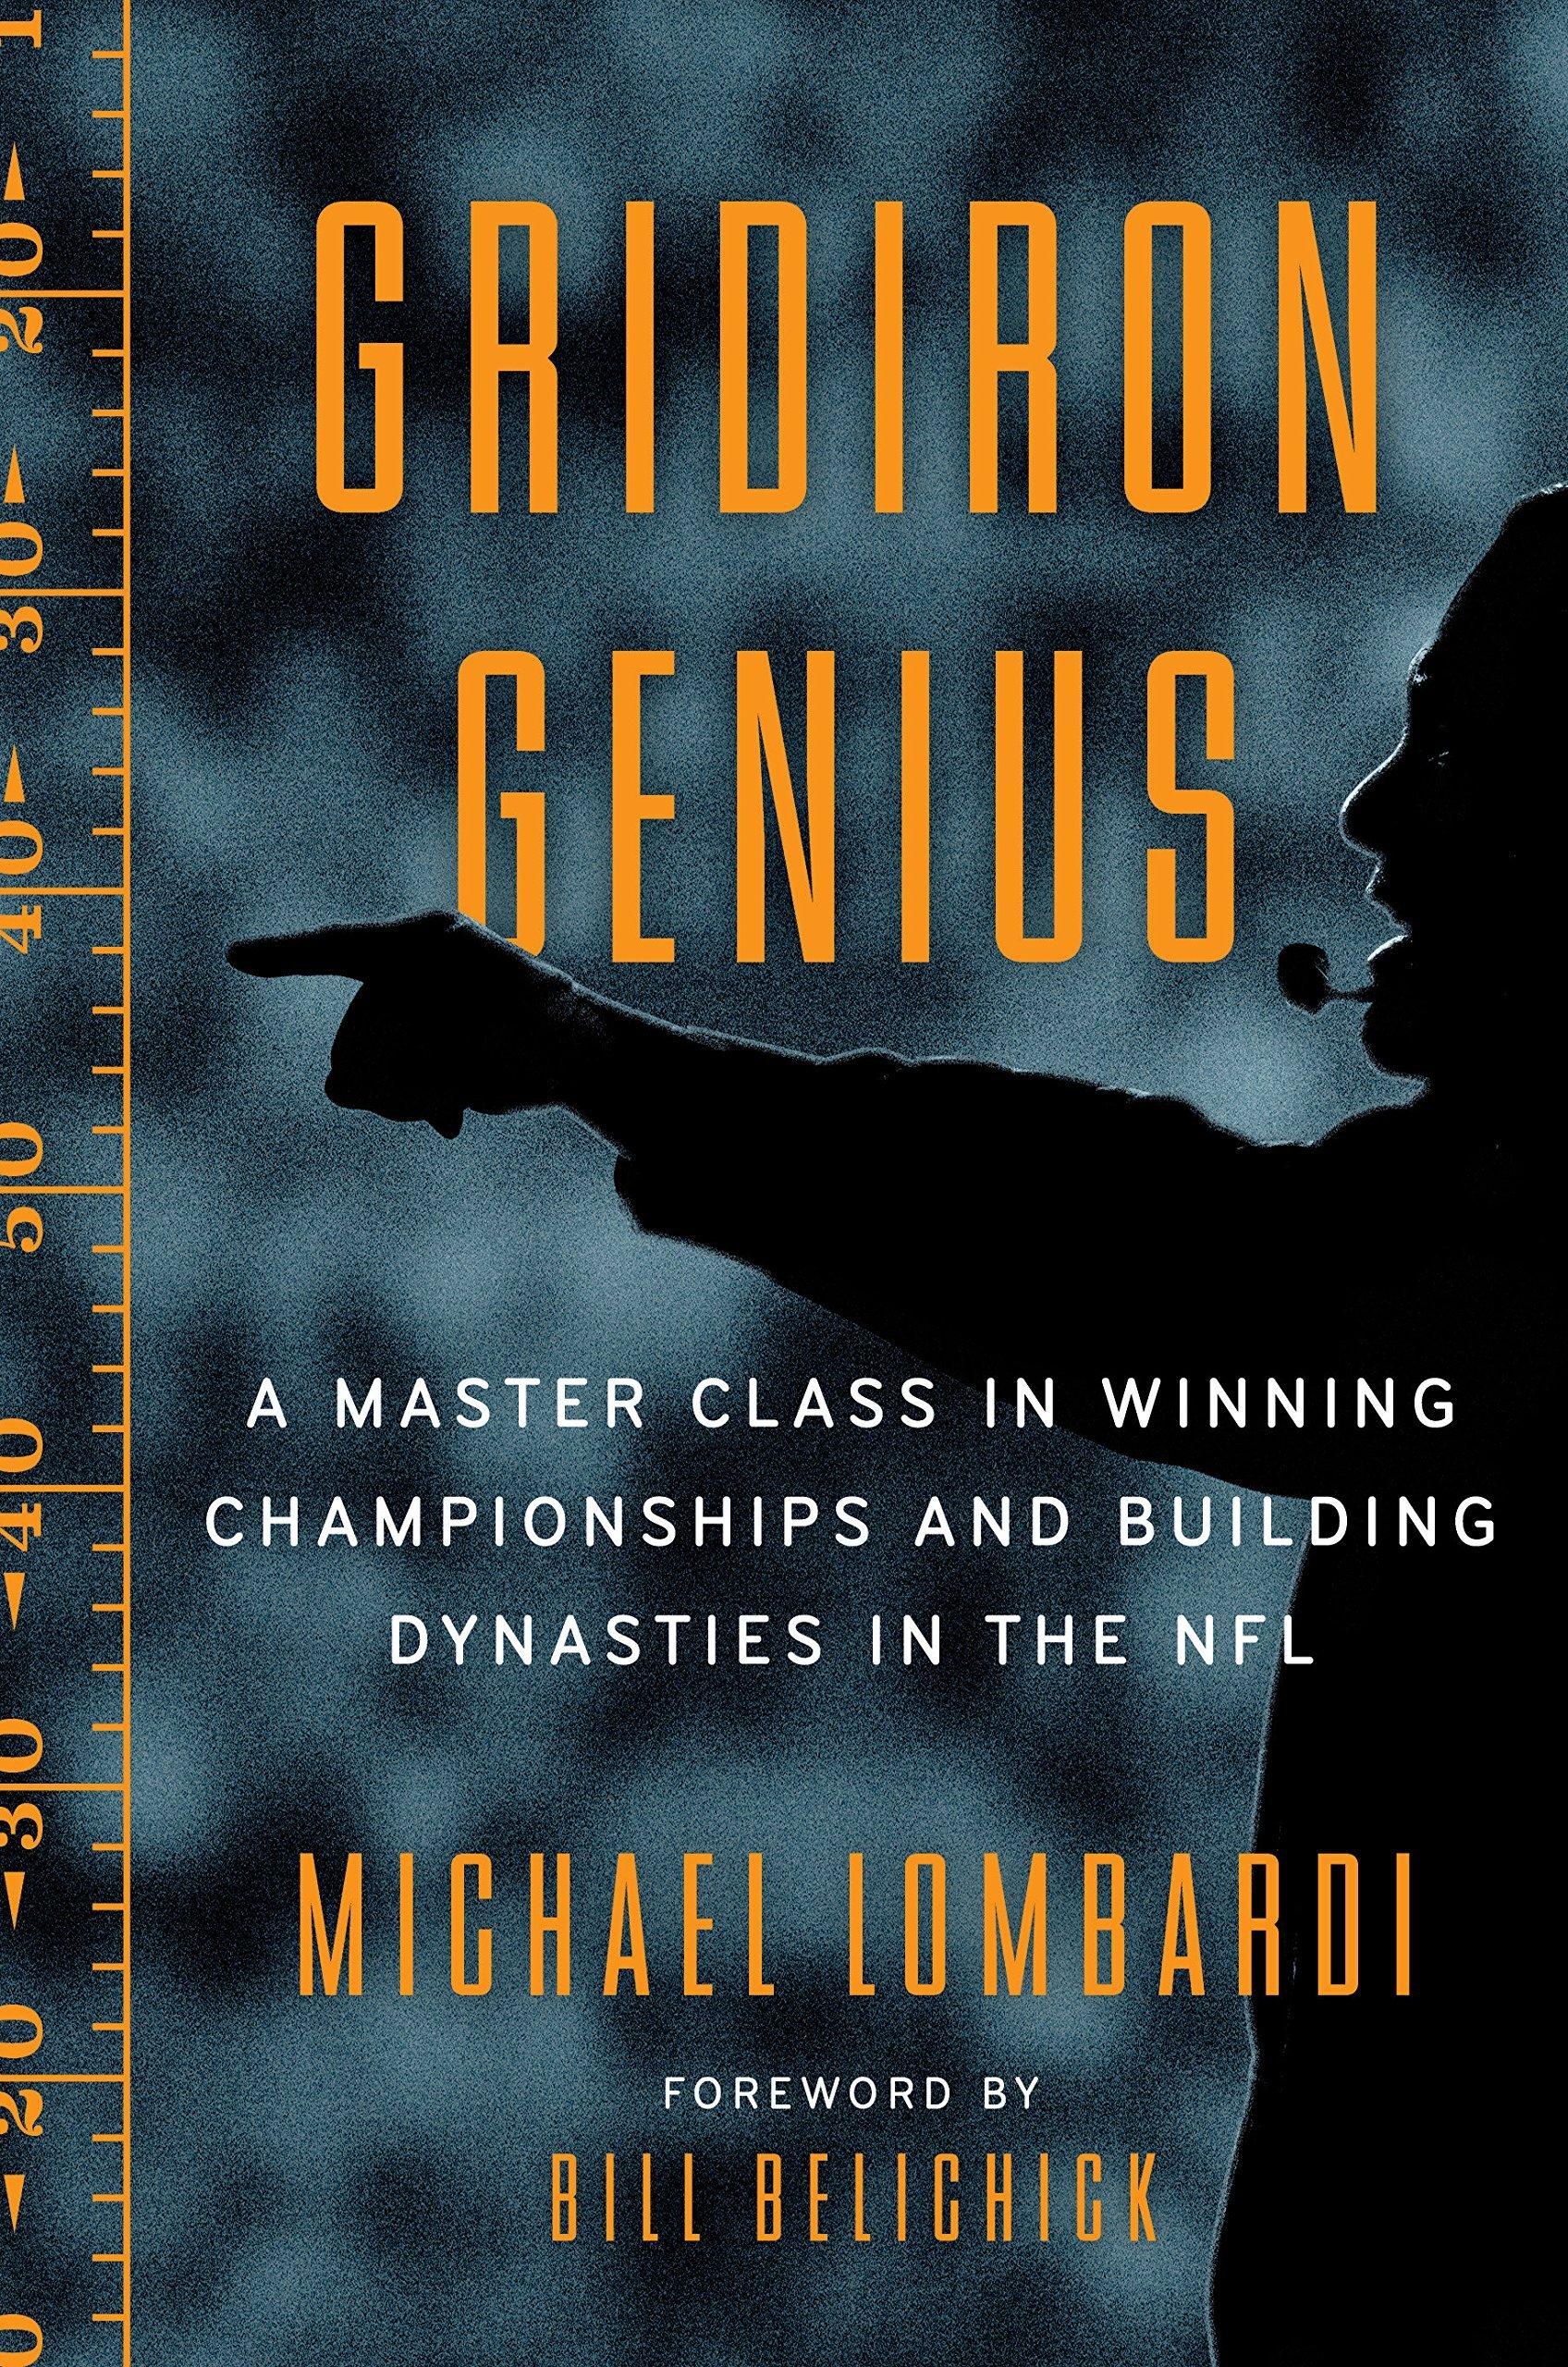 Gridiron Genius: A Master Class in Winning Championships and Building Dynasties in the NFL (Michael Lombardi)